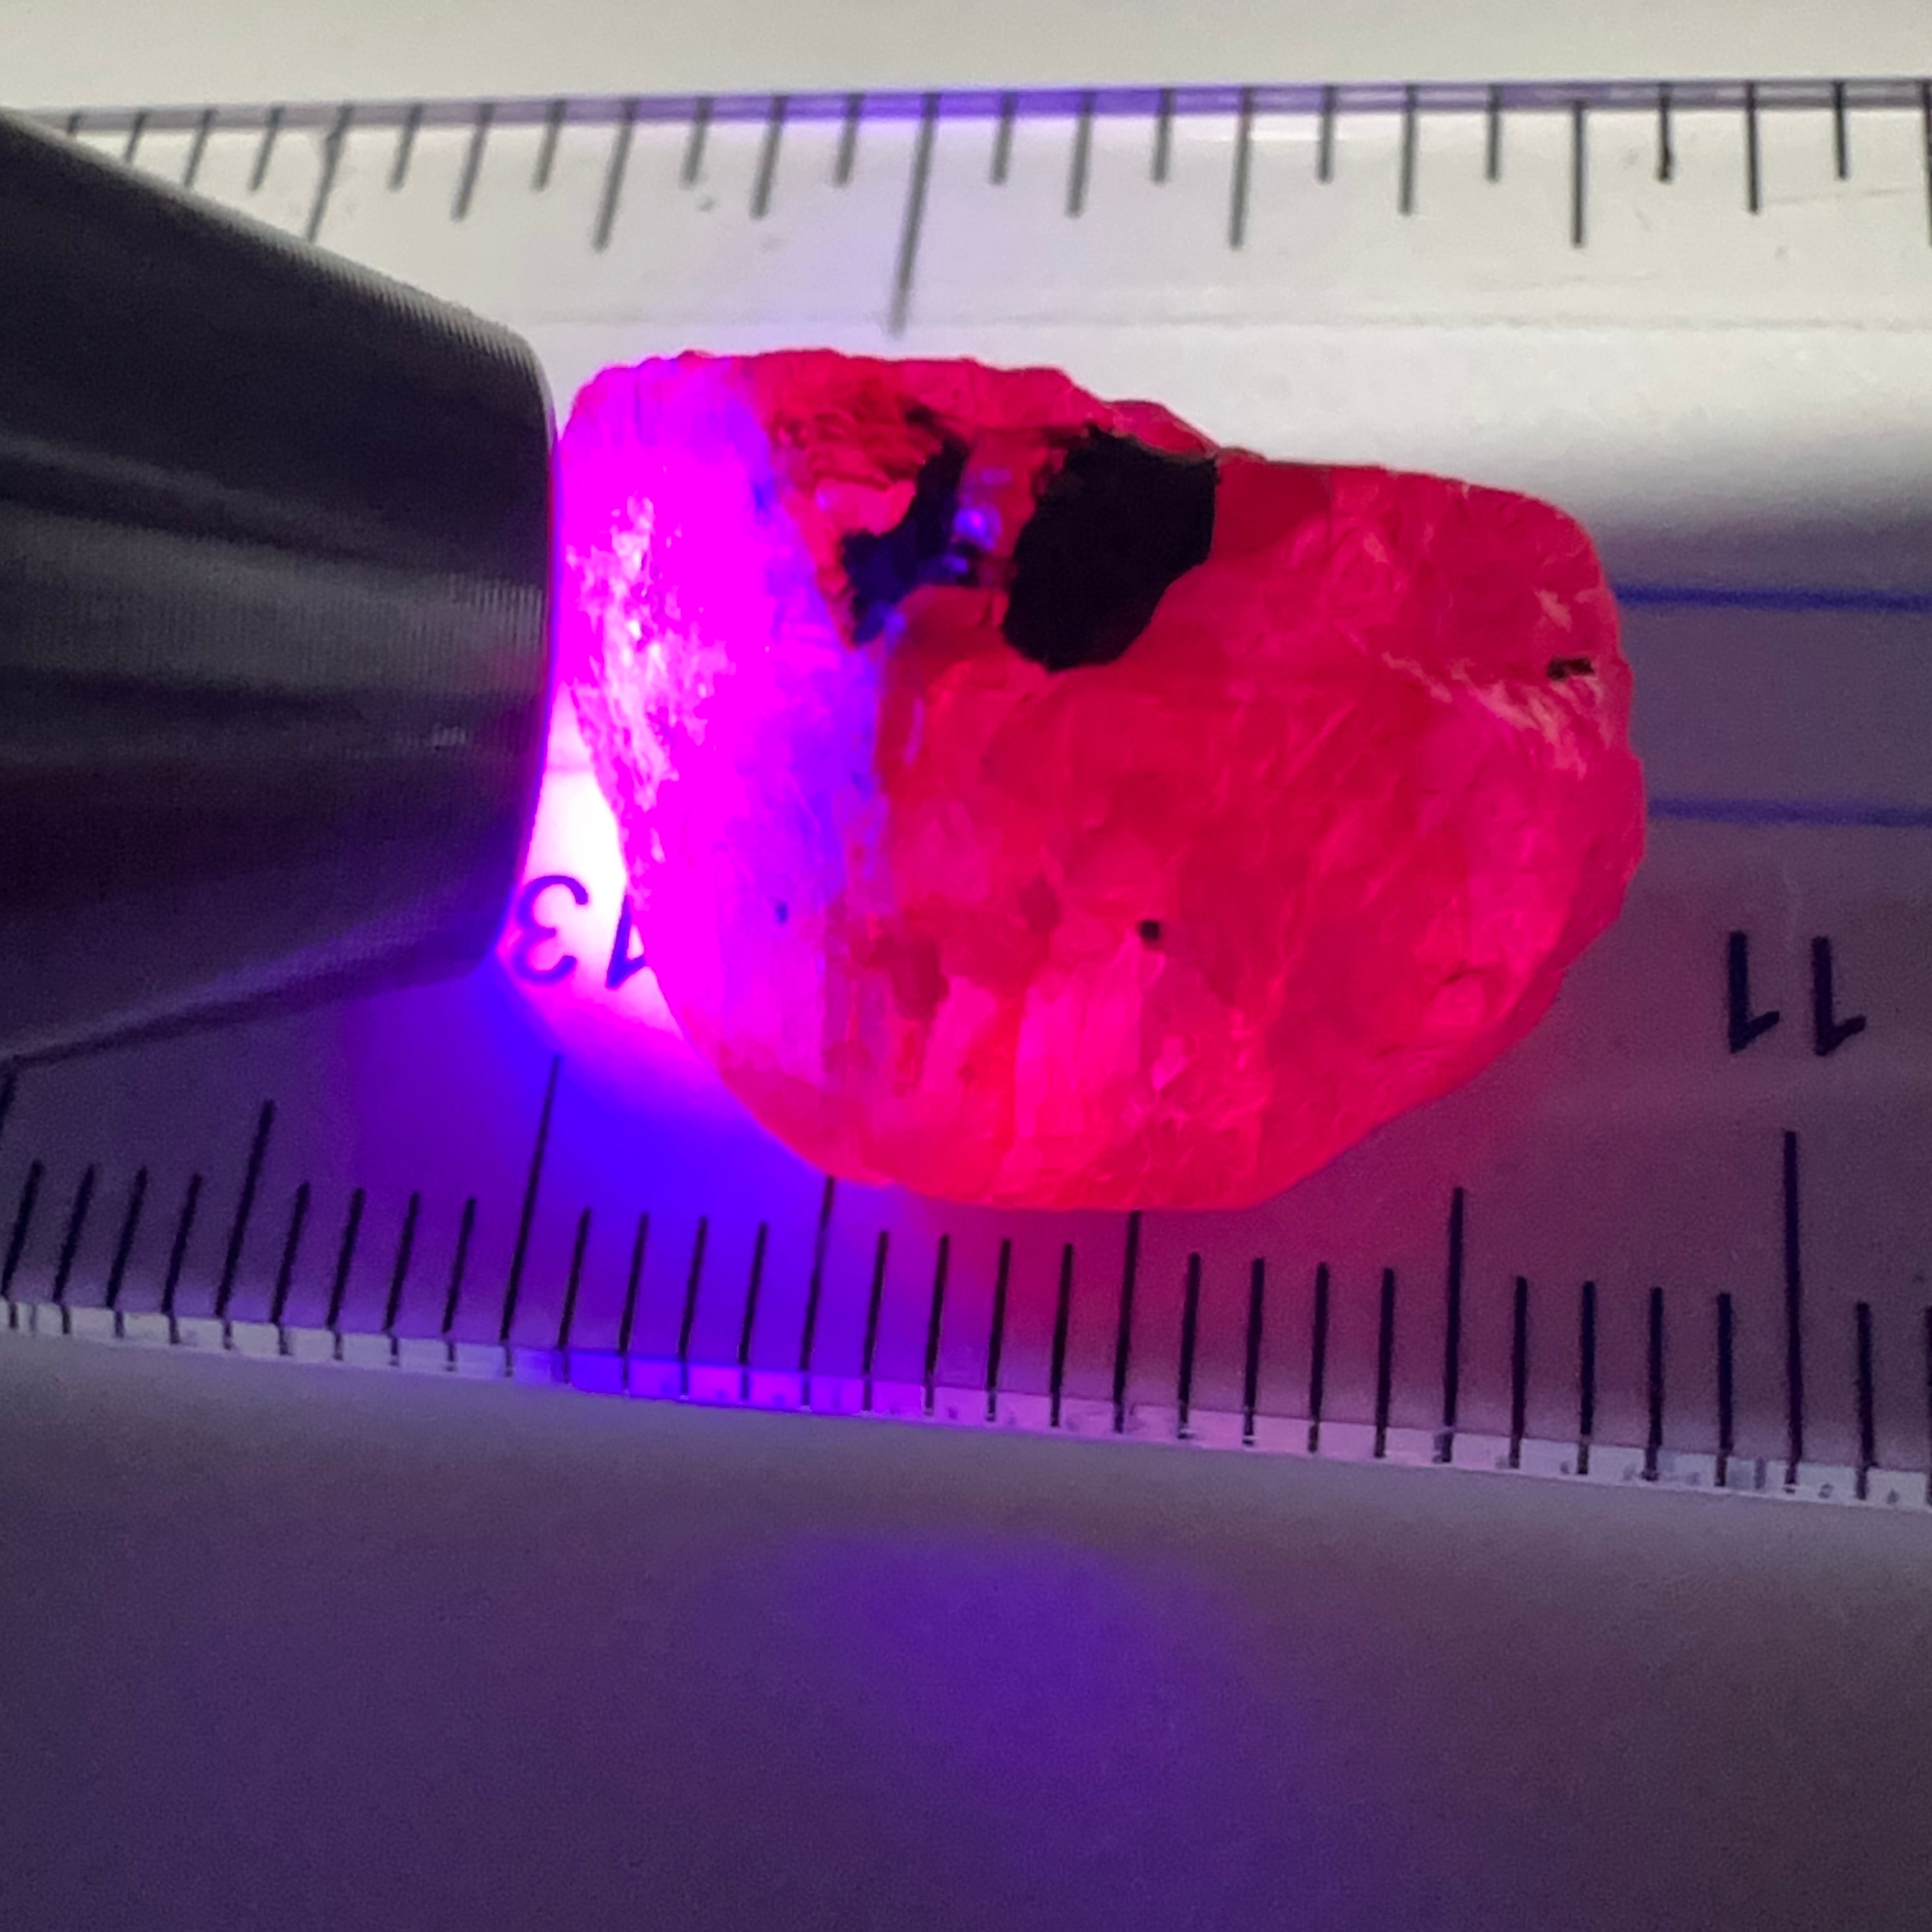 20.23ct Sapphire Ruby Crystal, Morogoro, Tanzania, Untreated Unheated. 18 x 12 x 9 mm, specimen/cab or facet it